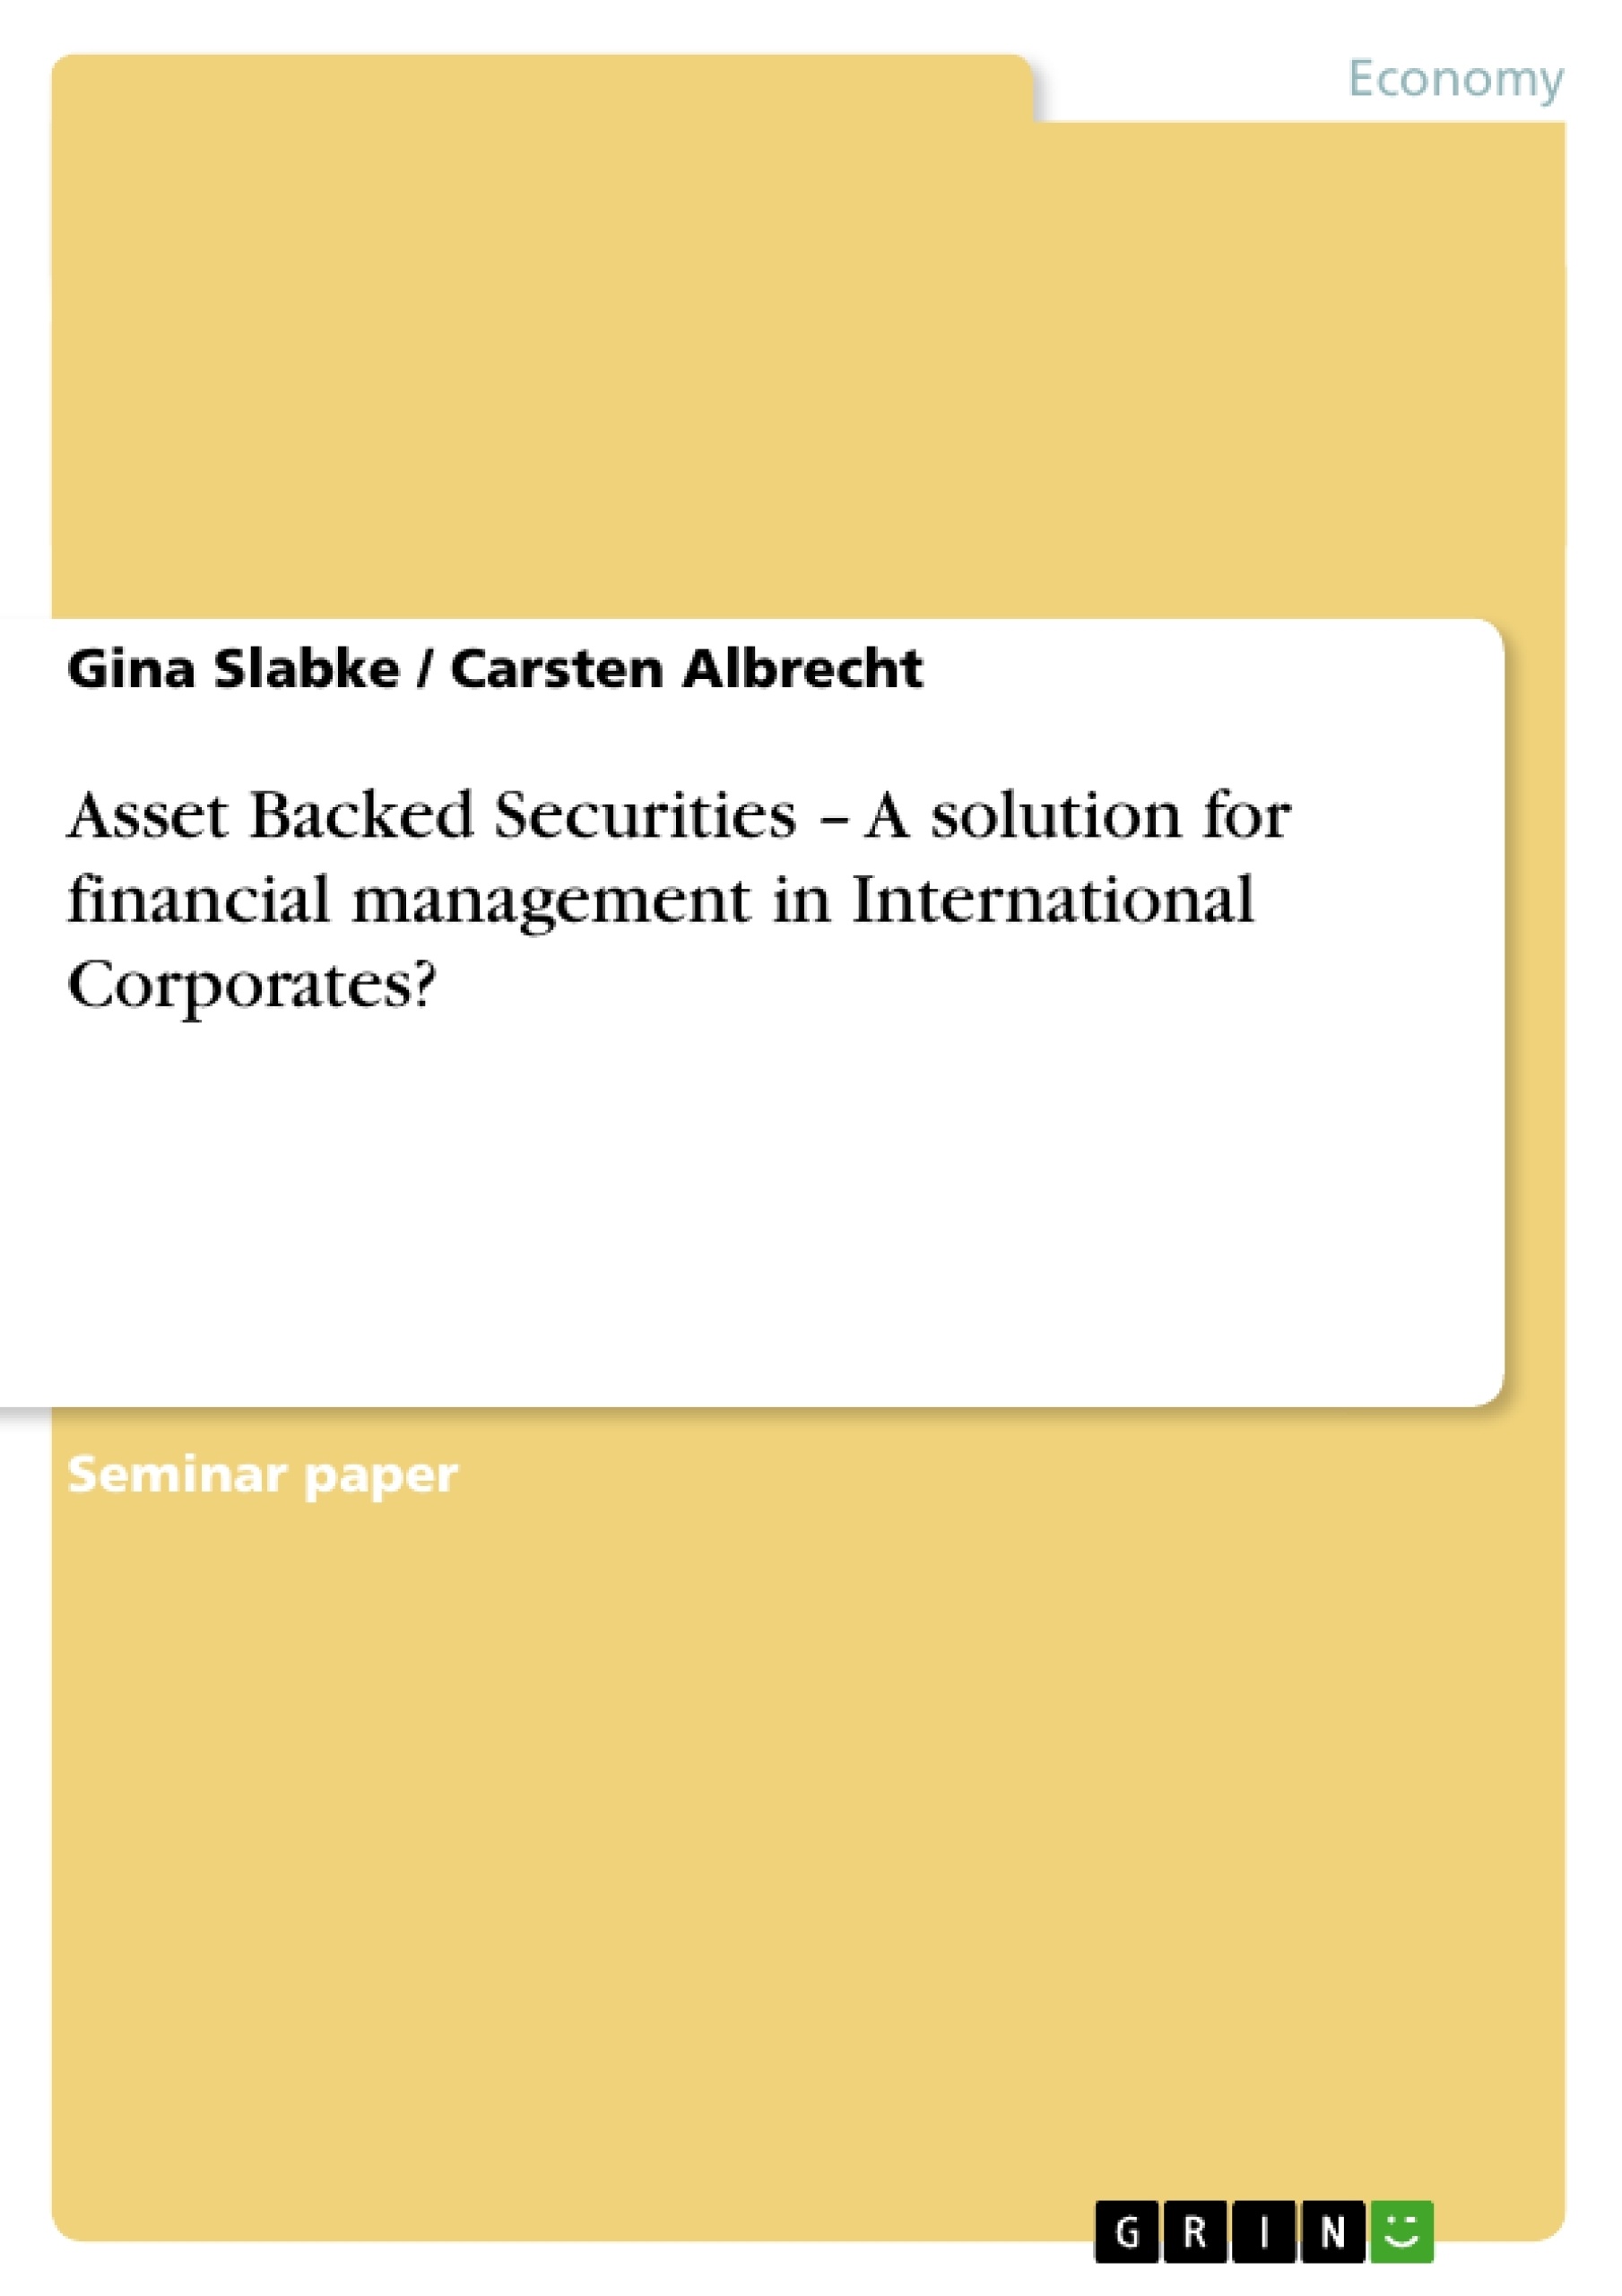 Title: Asset Backed Securities – A solution for financial management in International Corporates?